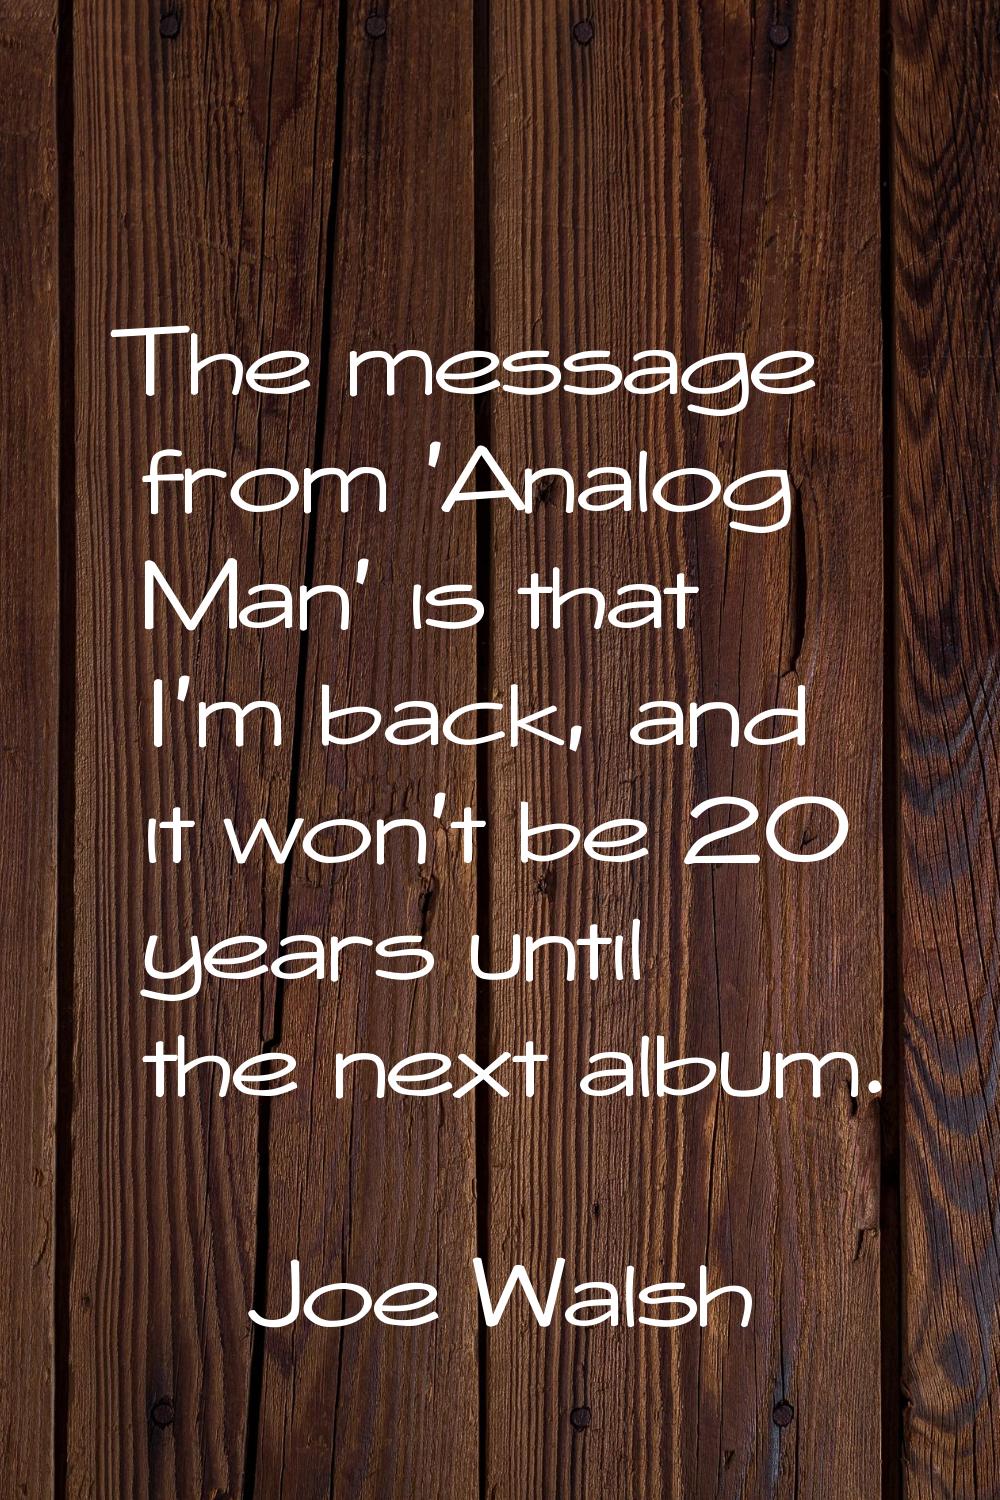 The message from 'Analog Man' is that I'm back, and it won't be 20 years until the next album.